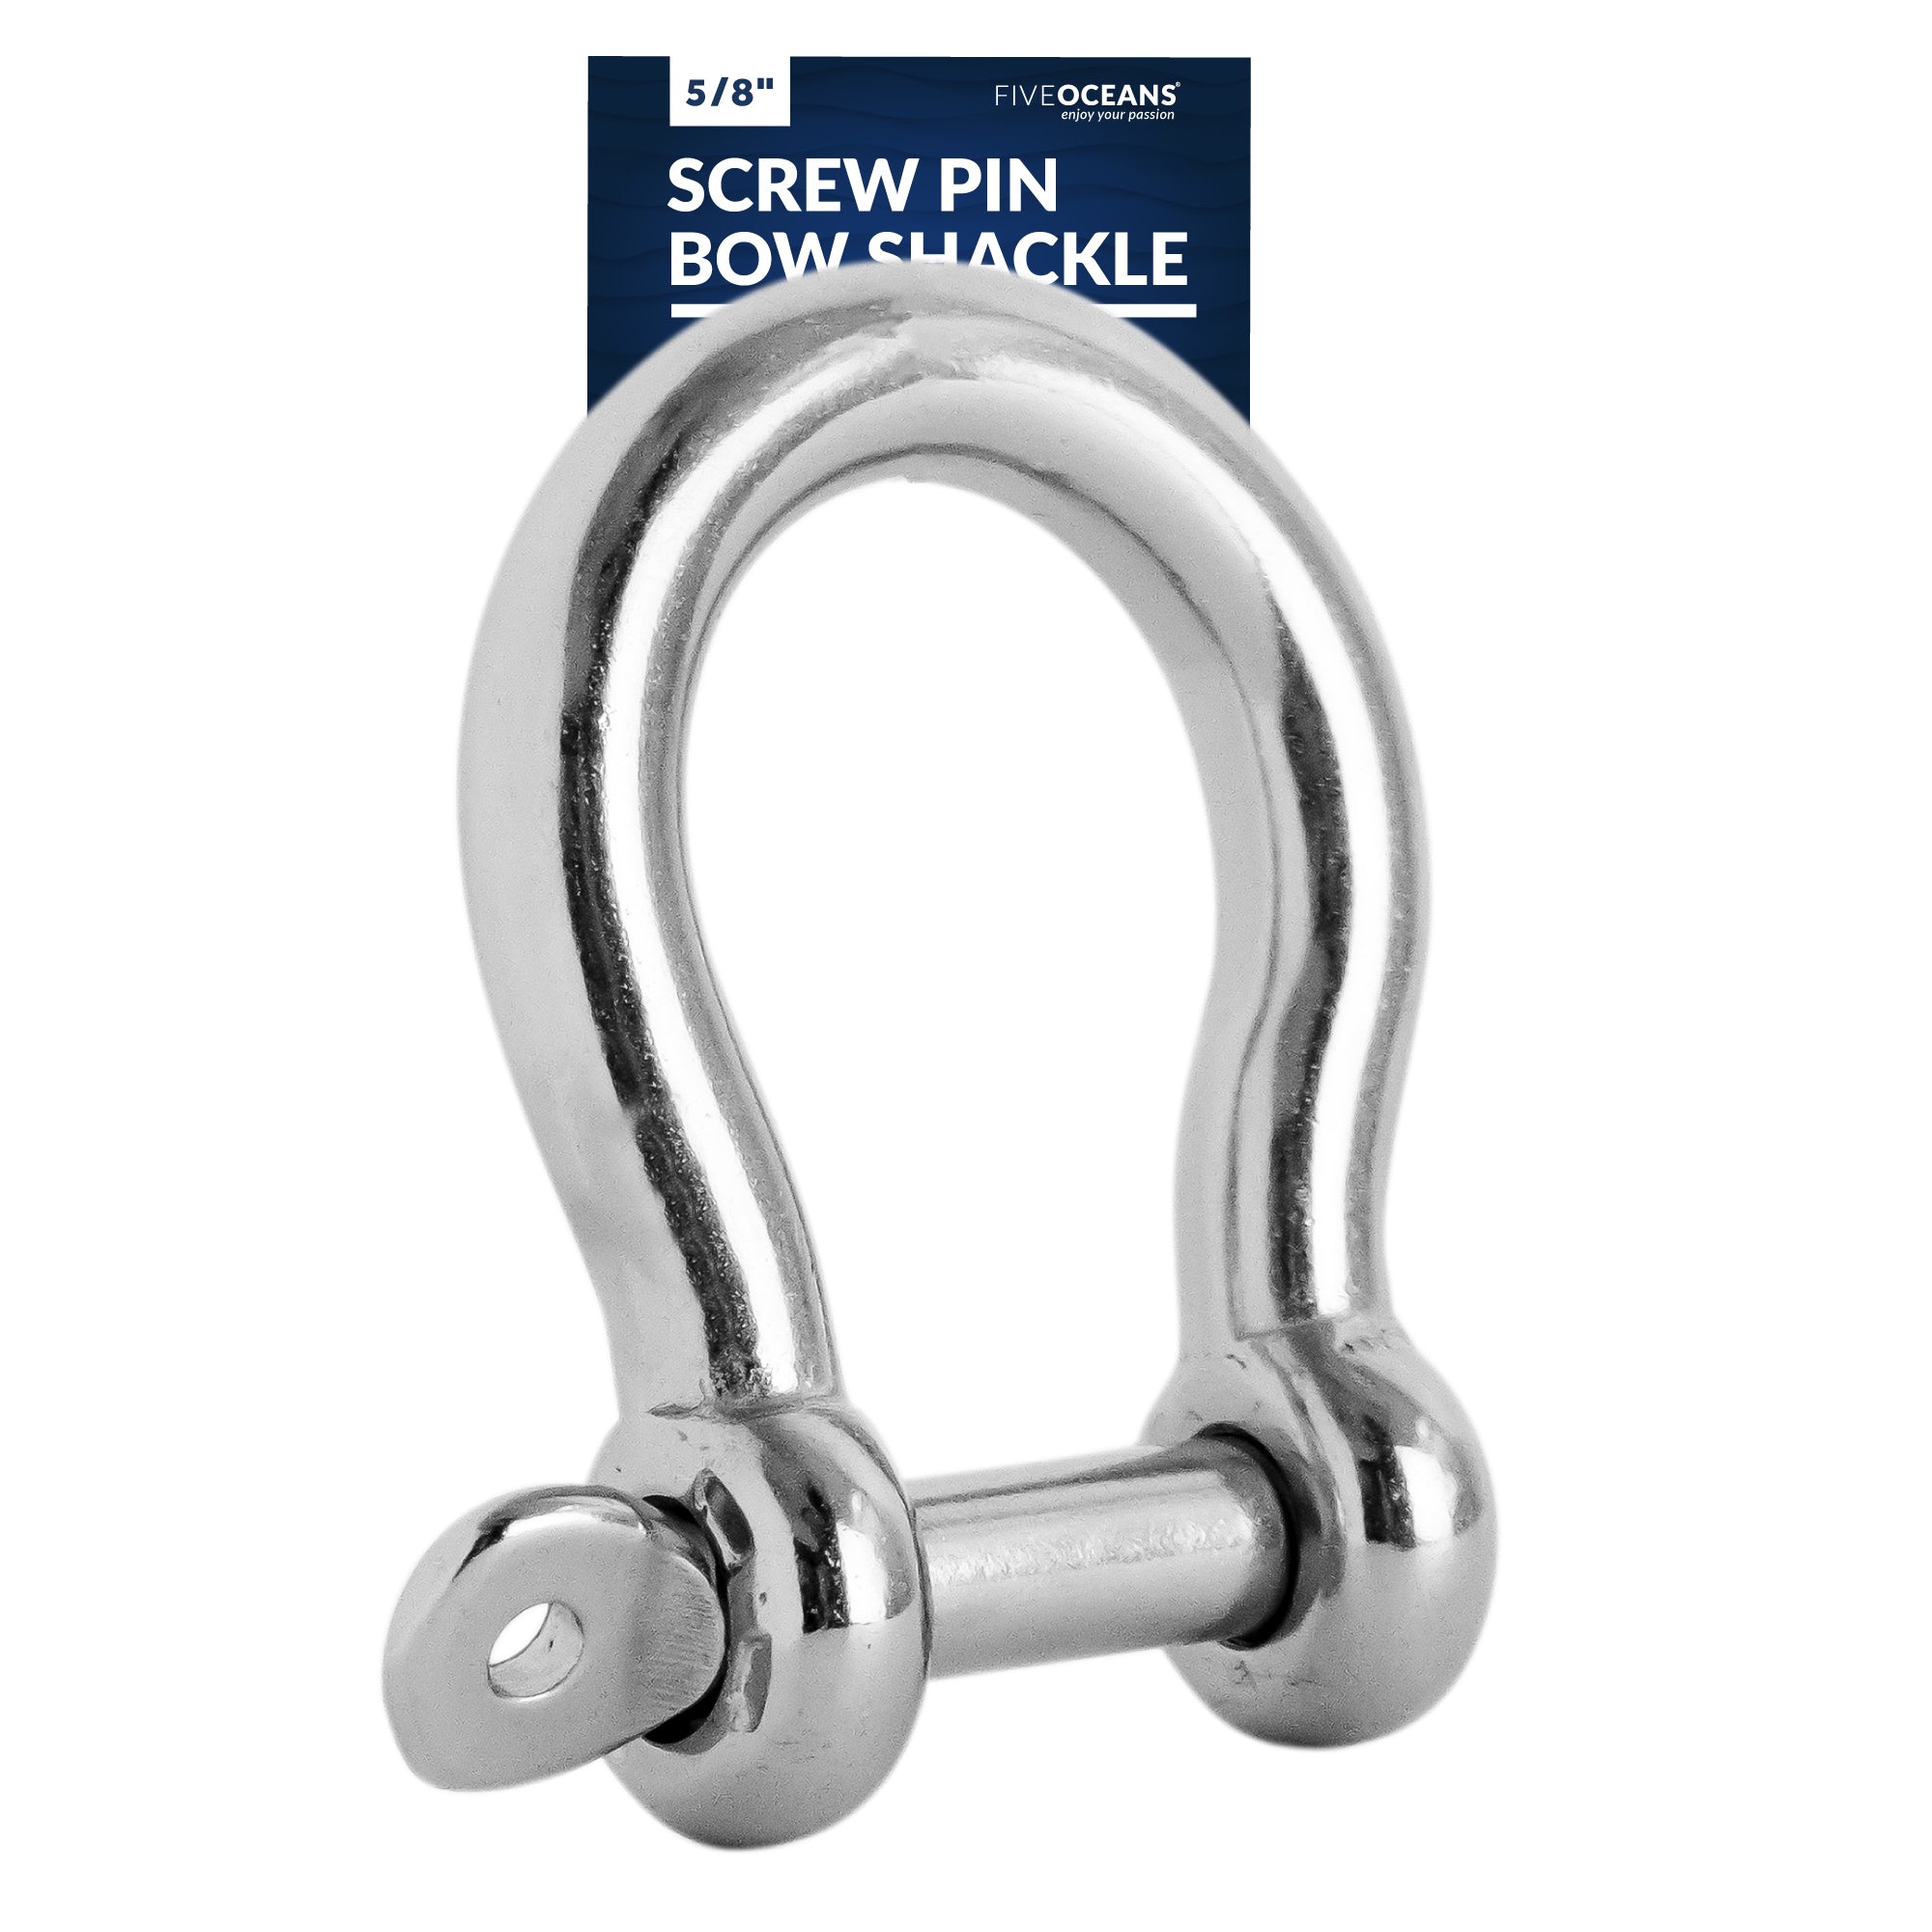 Pin Bow Shackles, 5/8" Stainless Steel - FO430